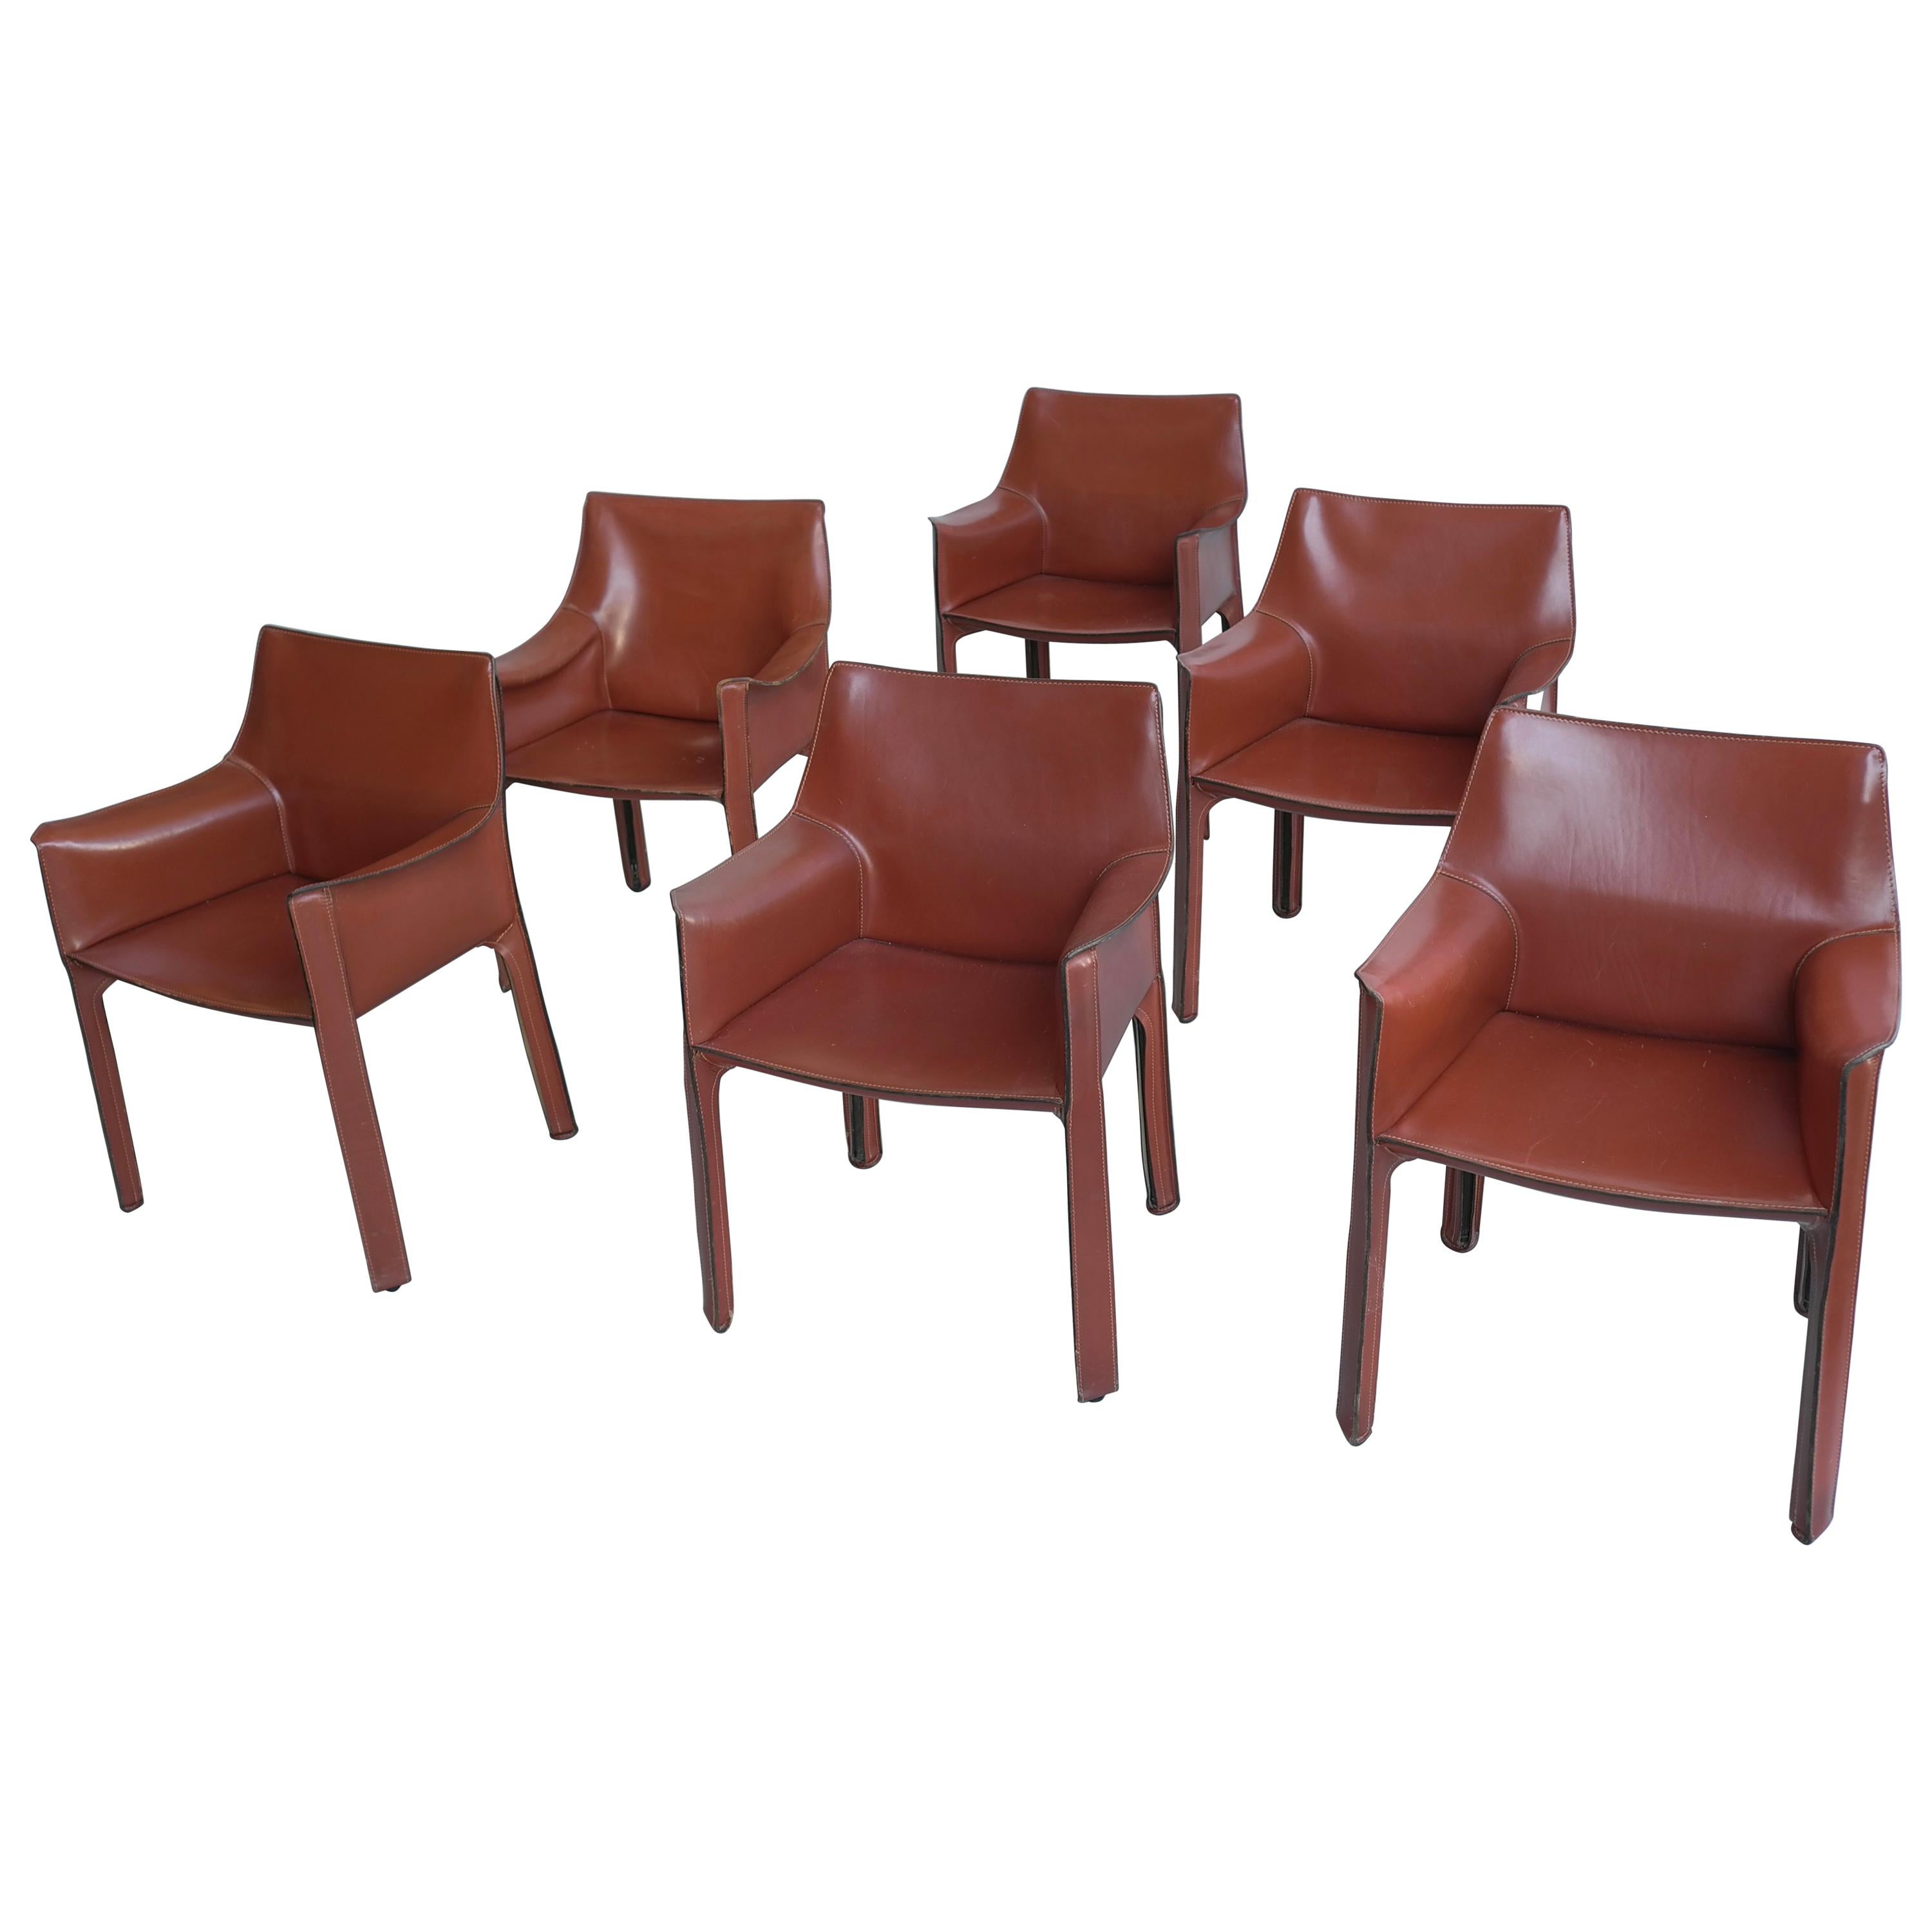 Set of Six Mario Bellini Leather Cab Chairs by Cassina Italy